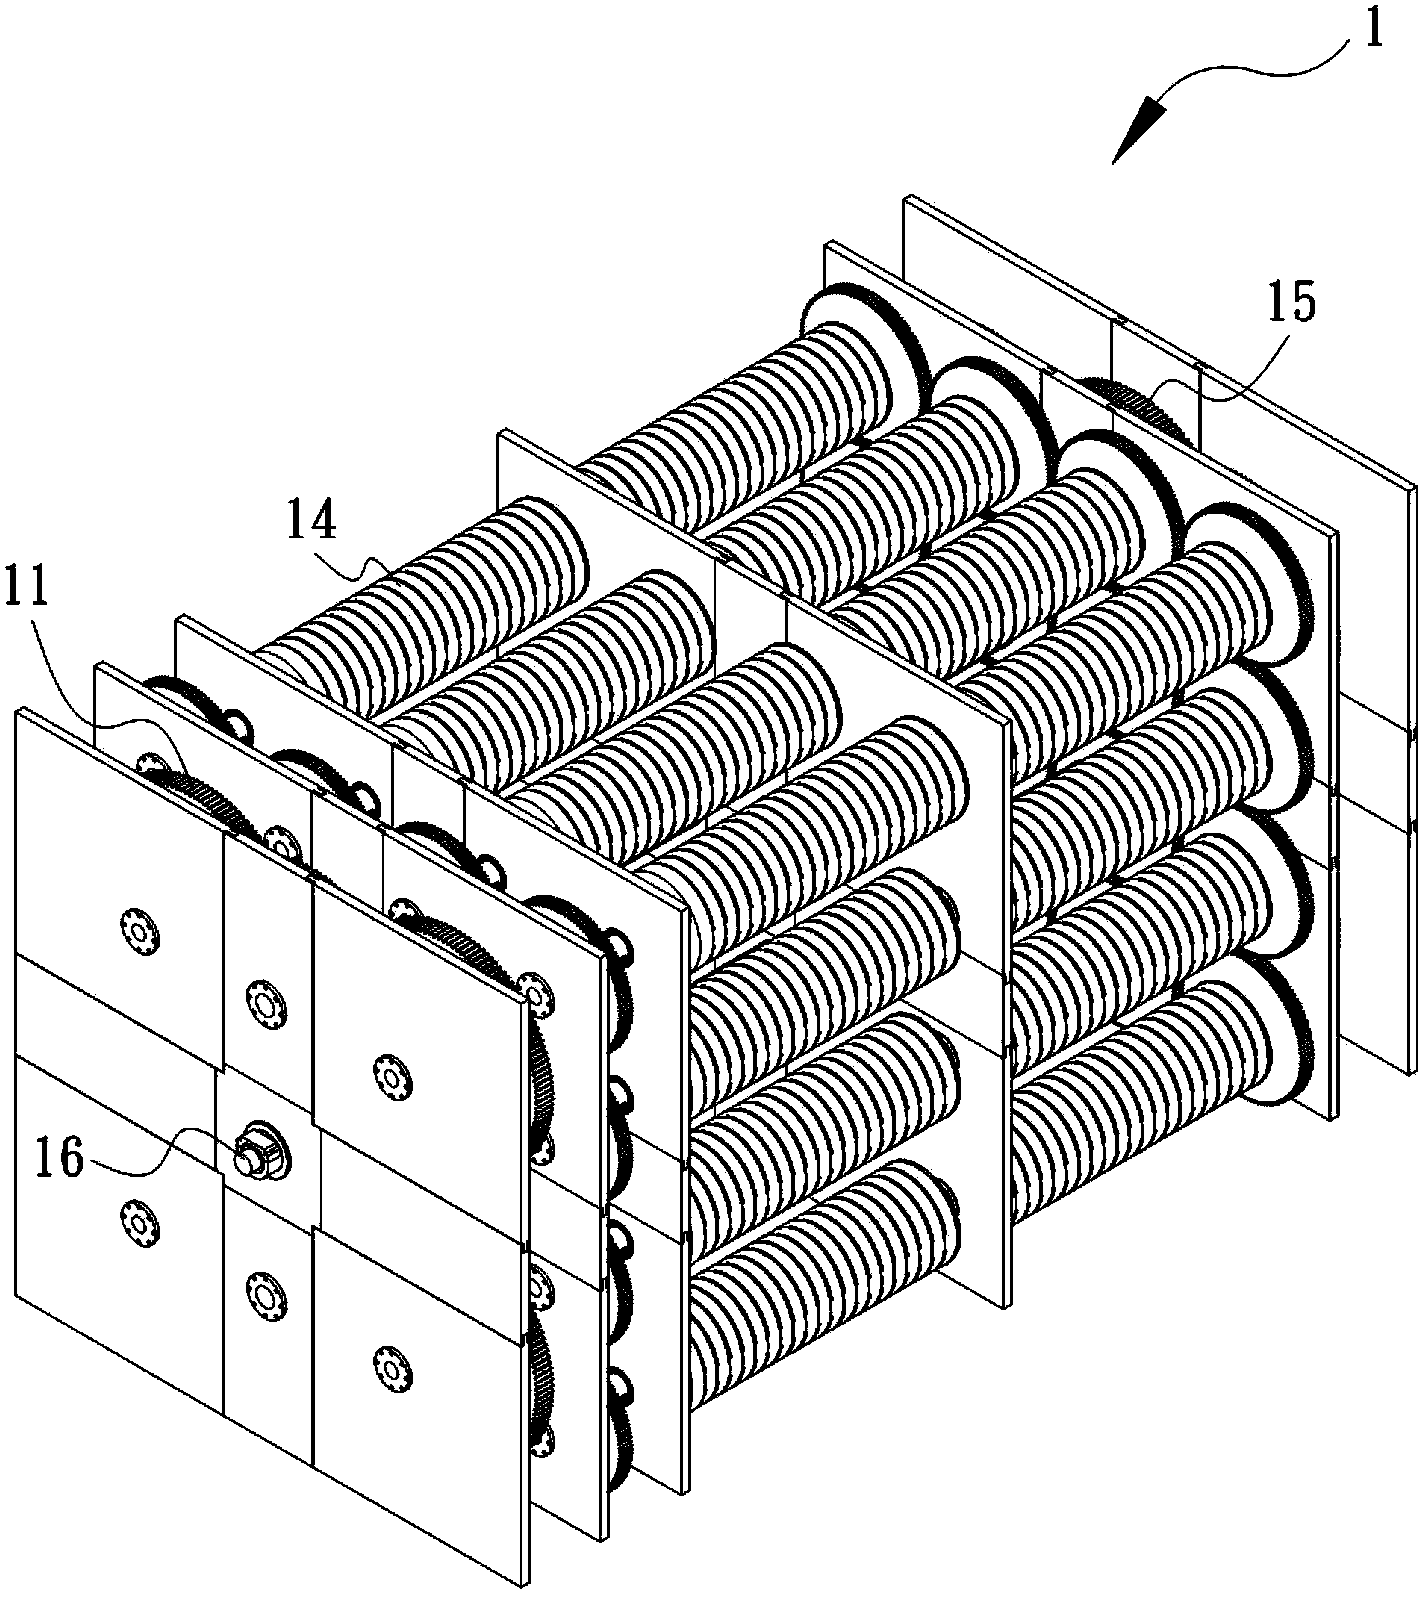 Energy storage device for storing energy as spring torsion